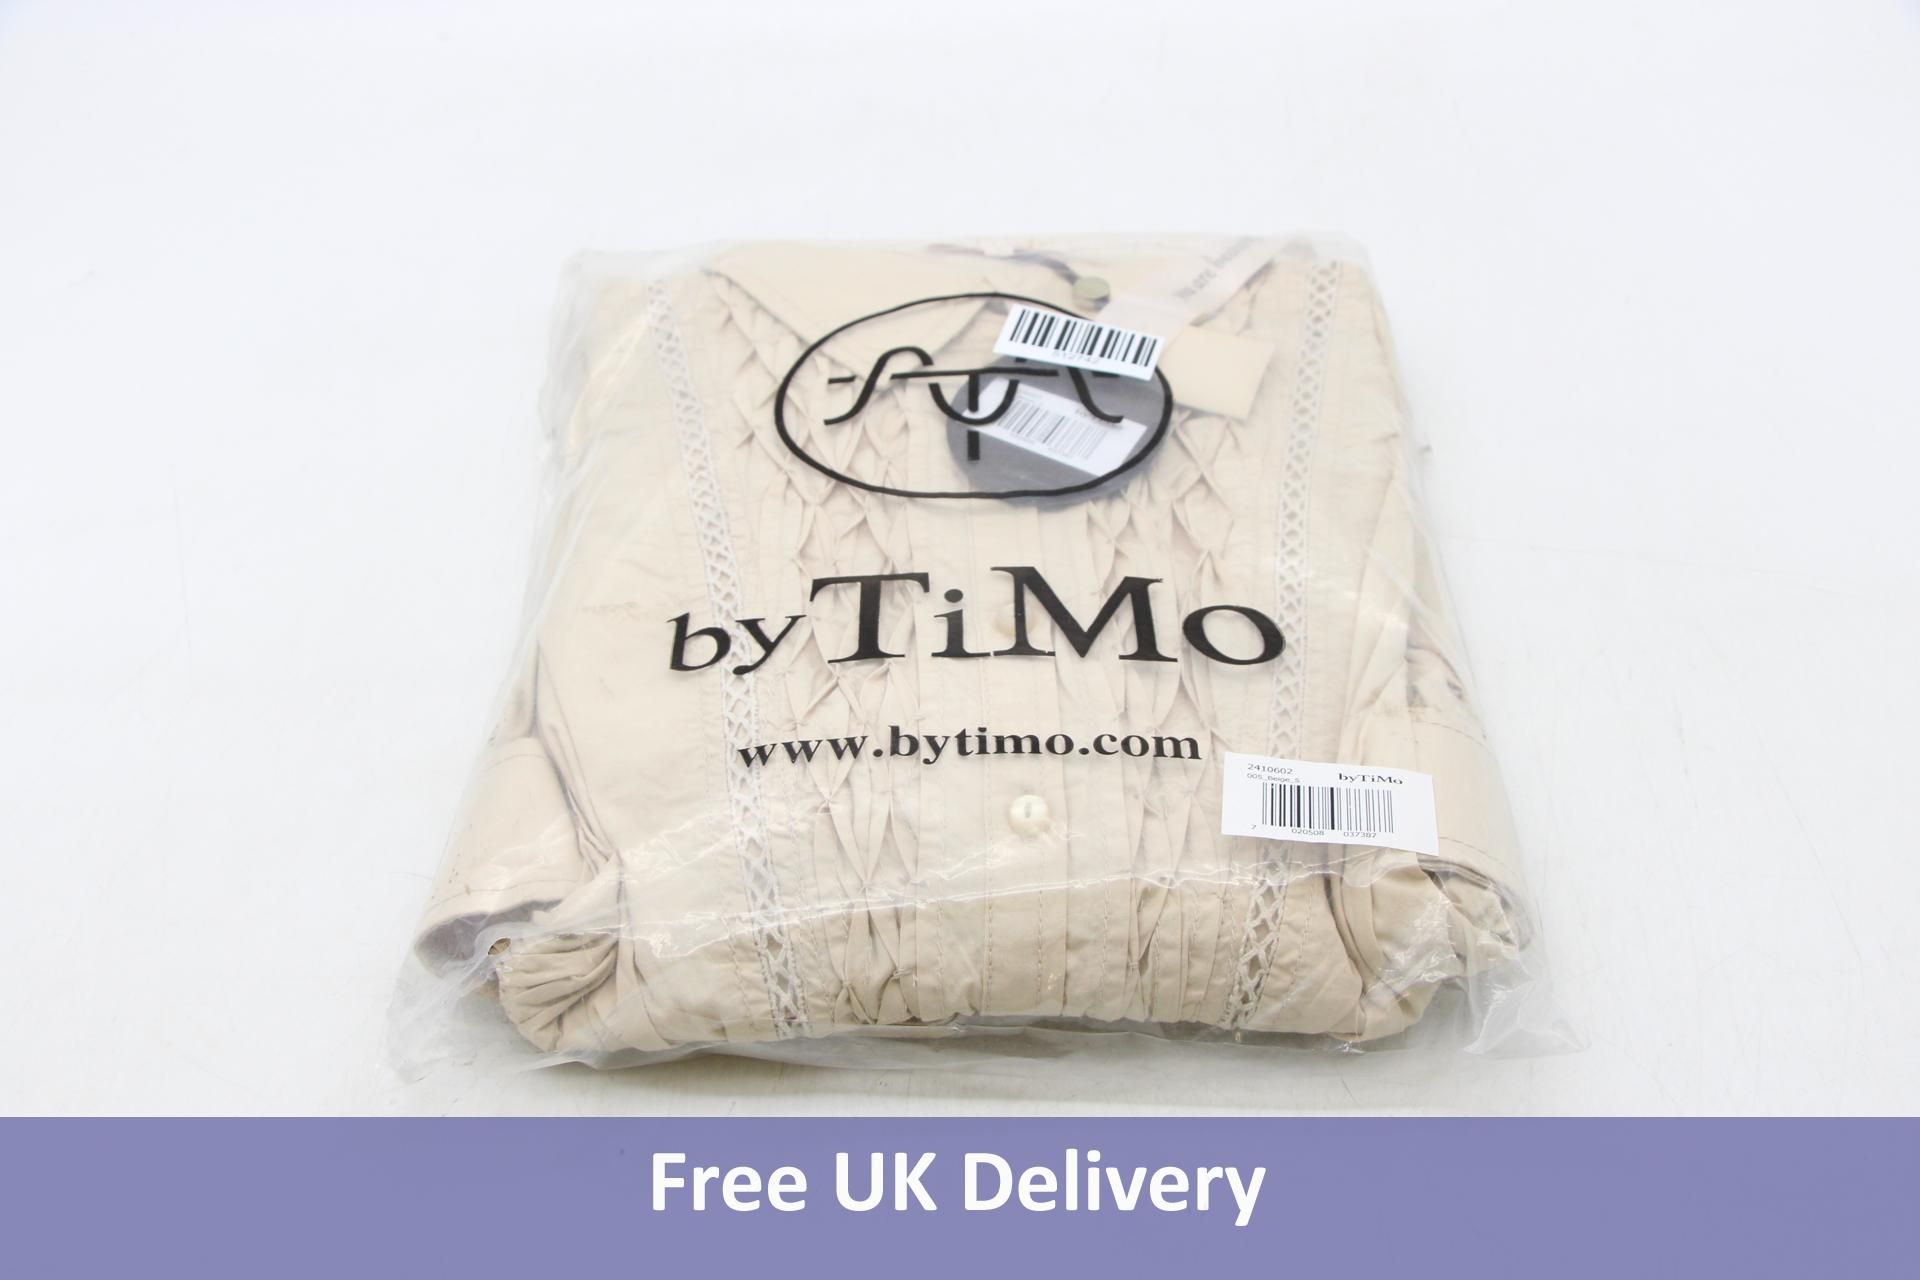 Bytimo Midi Shirt Dress with Embroidery, Beige, Size Small